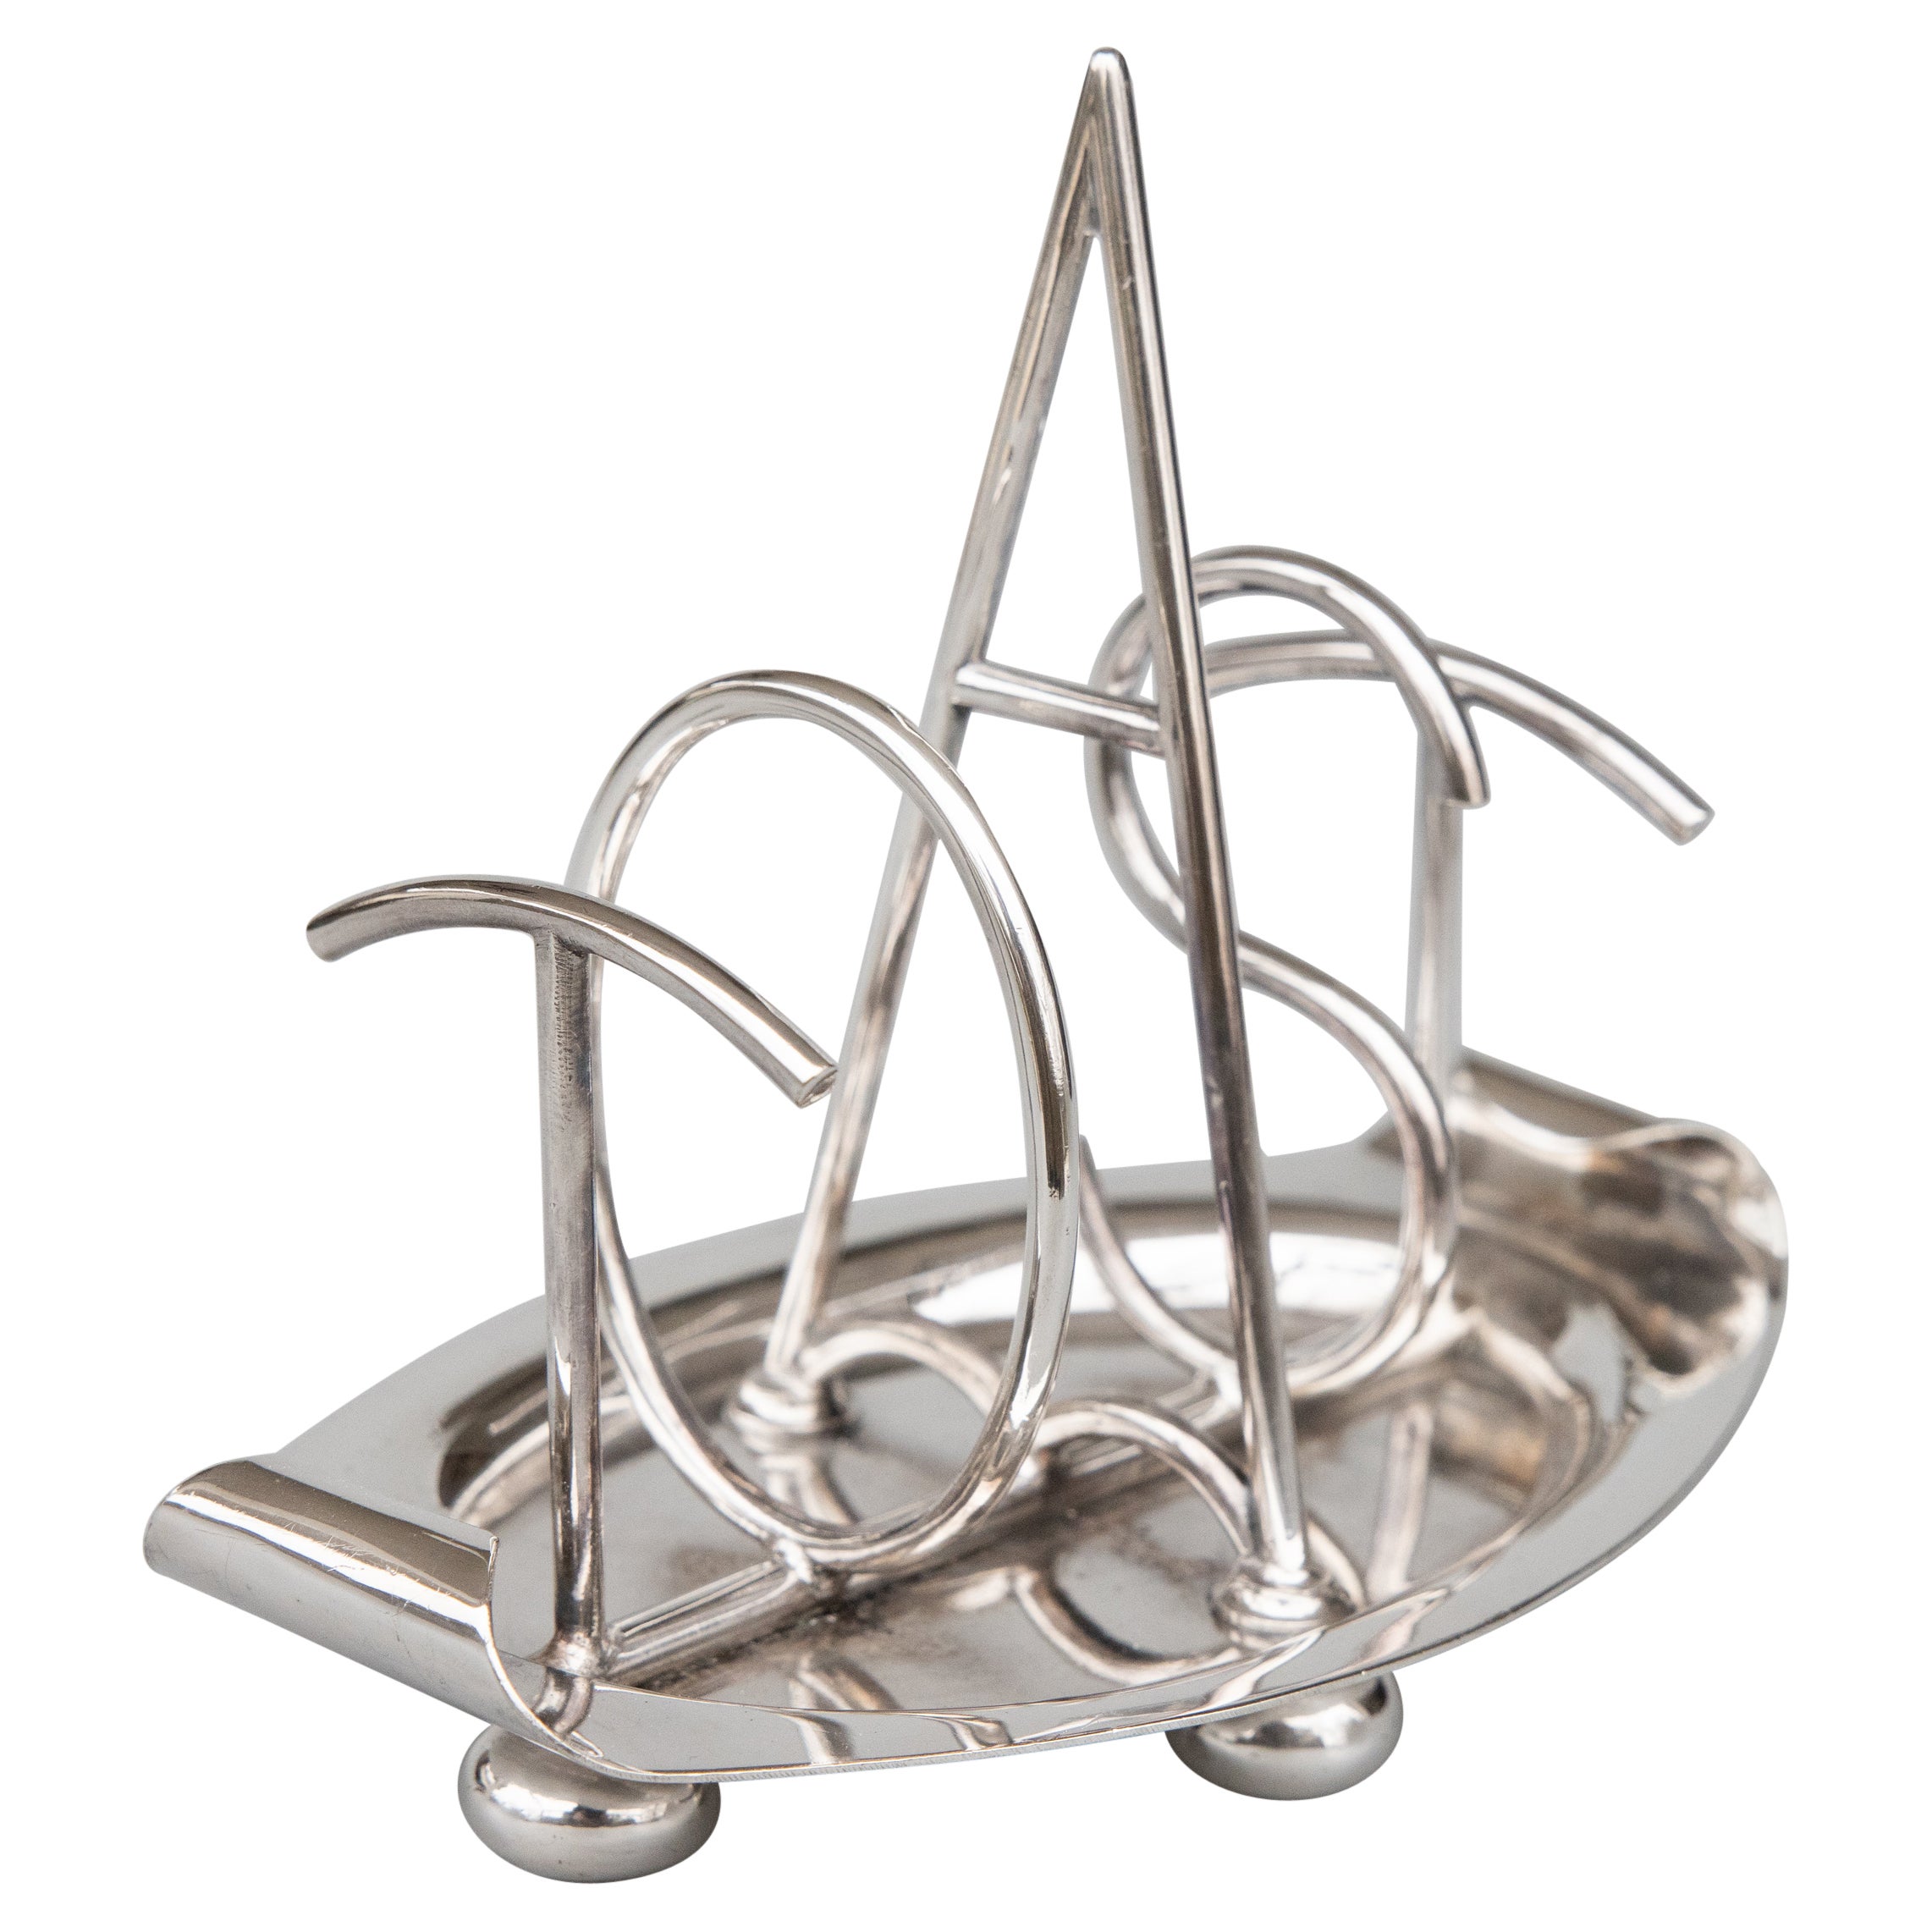 Antique English Walker & Hall Sheffield Silver Plate Toast Rack, Dated 1903